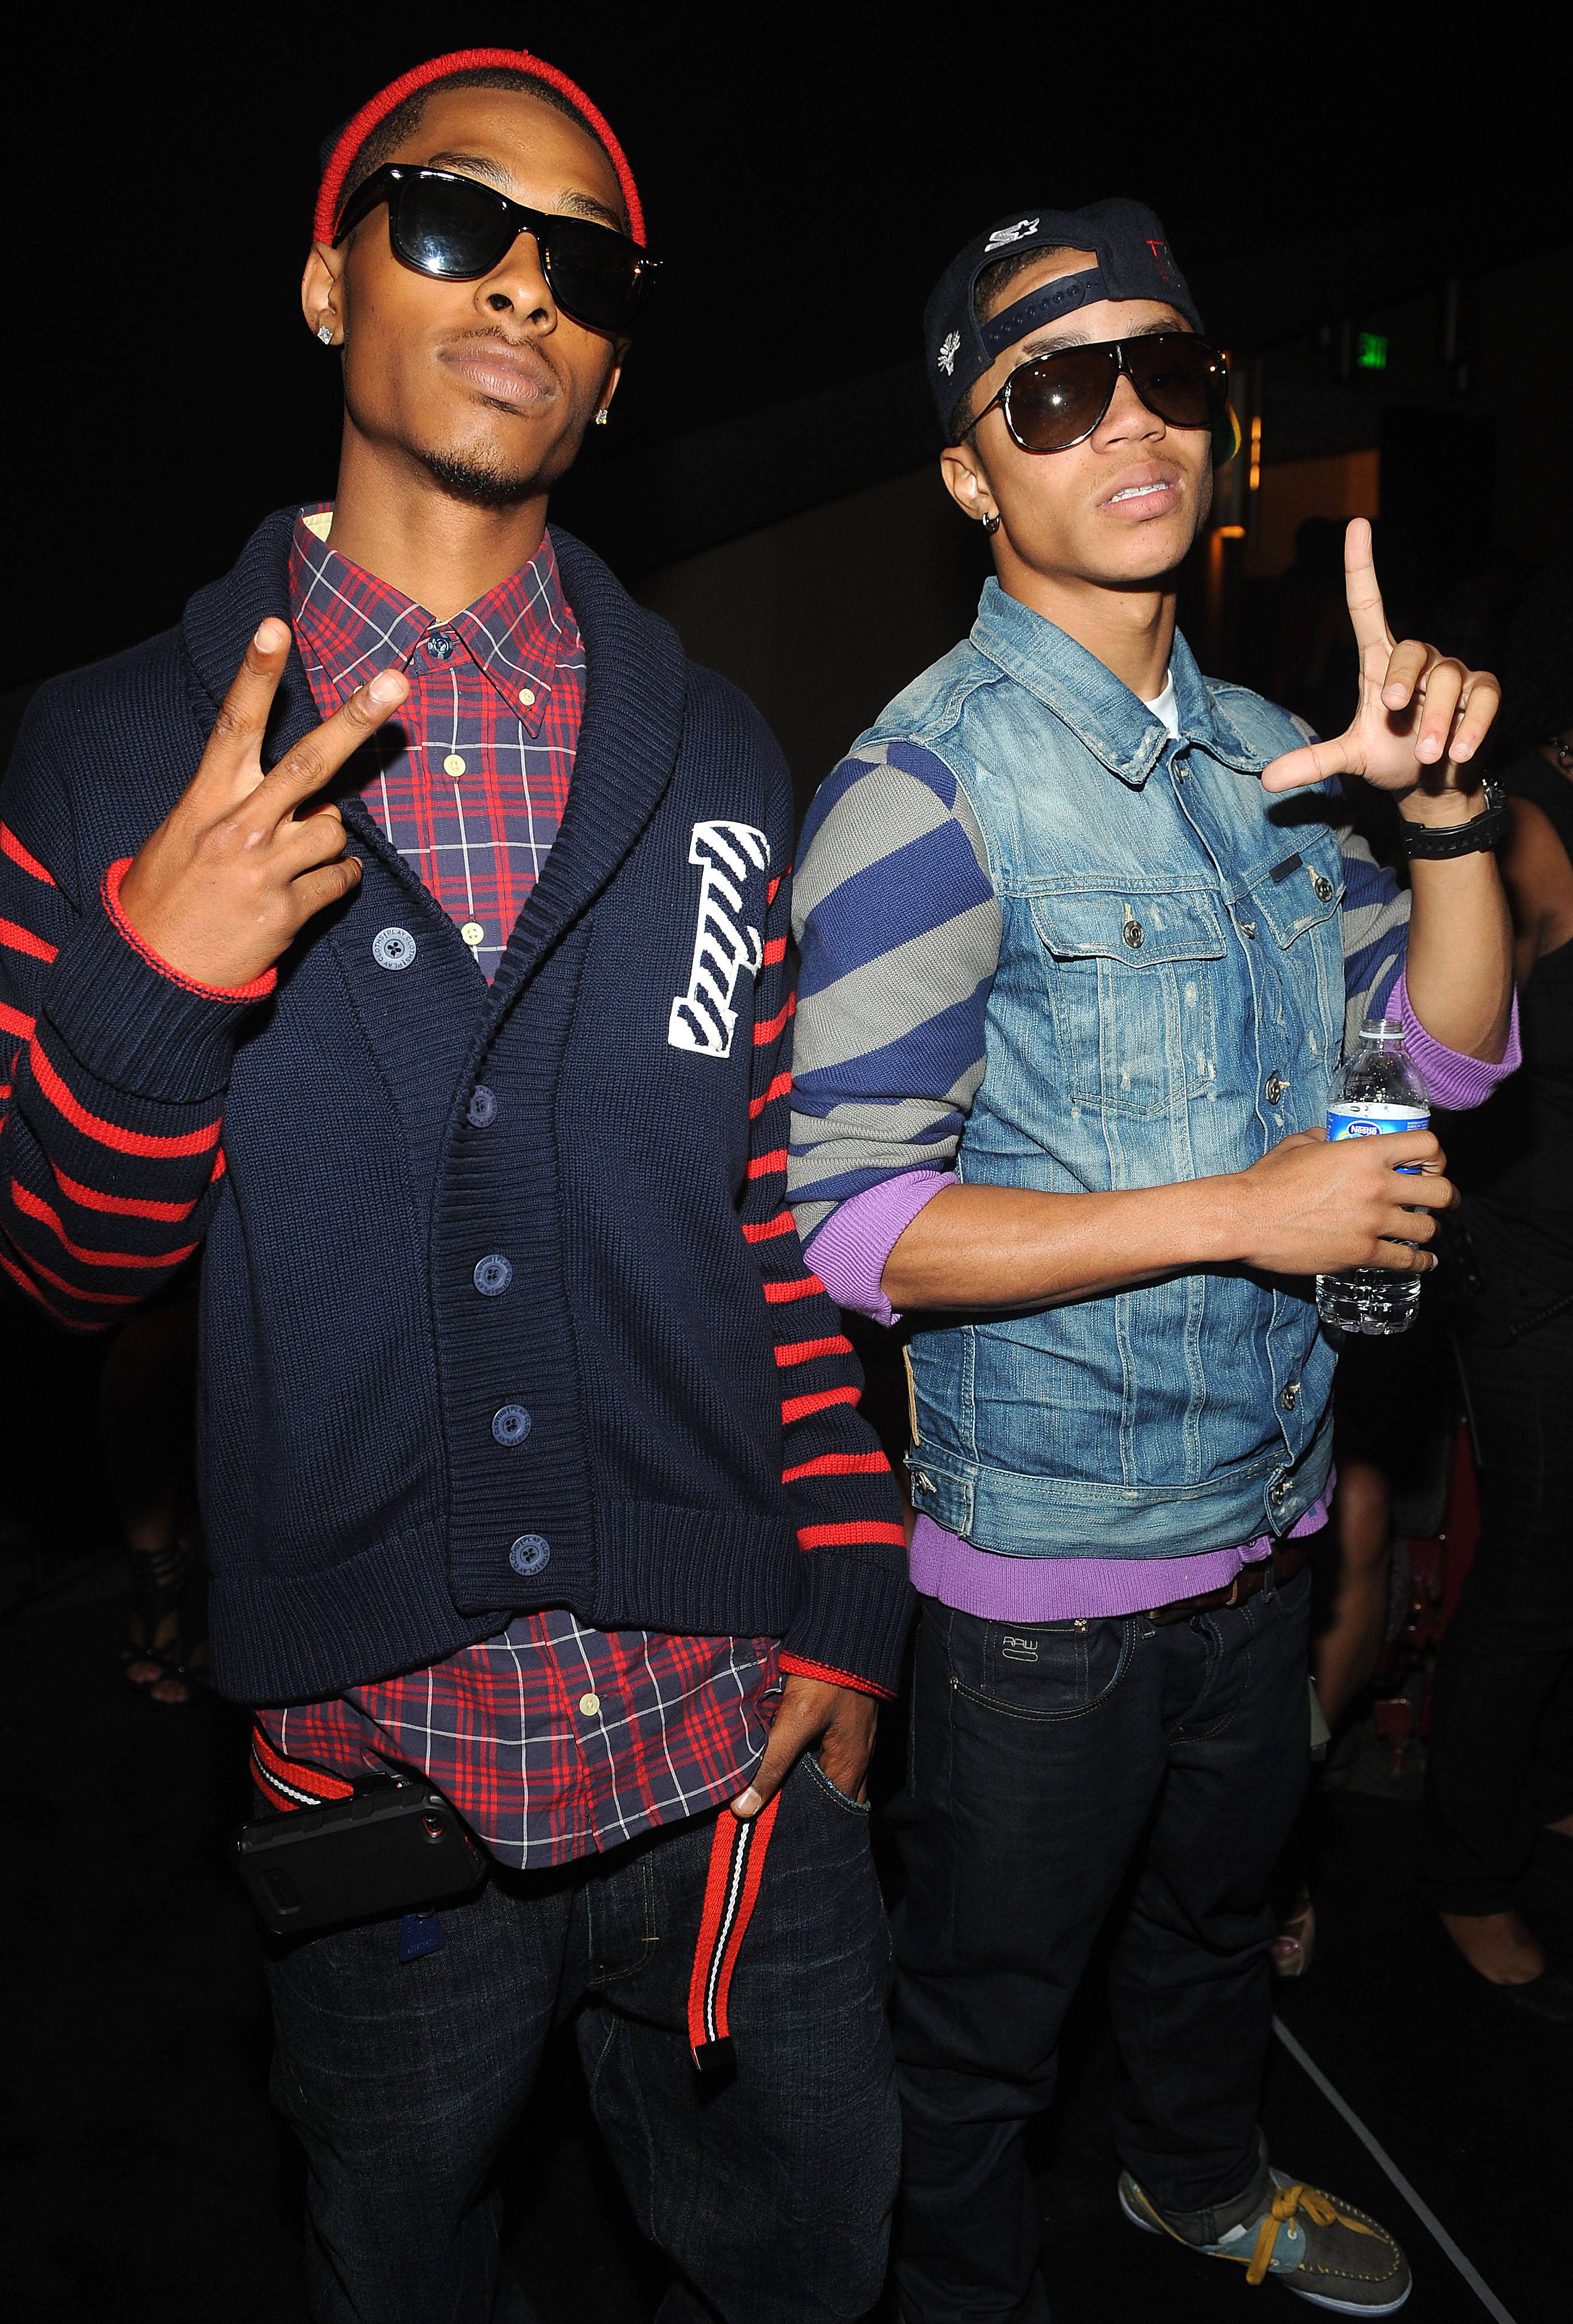 New Boyz - These skinny jeans wearing California spitters came to prominence with their “You’re a Jerk” single in 2009. While their debut, “Skinny Jeans and a Mic” fell short of the gold mark, Ben J and Legacy put in the ground work for its follow-up to be successful. (Photo: Brad Barket/PictureGroup)